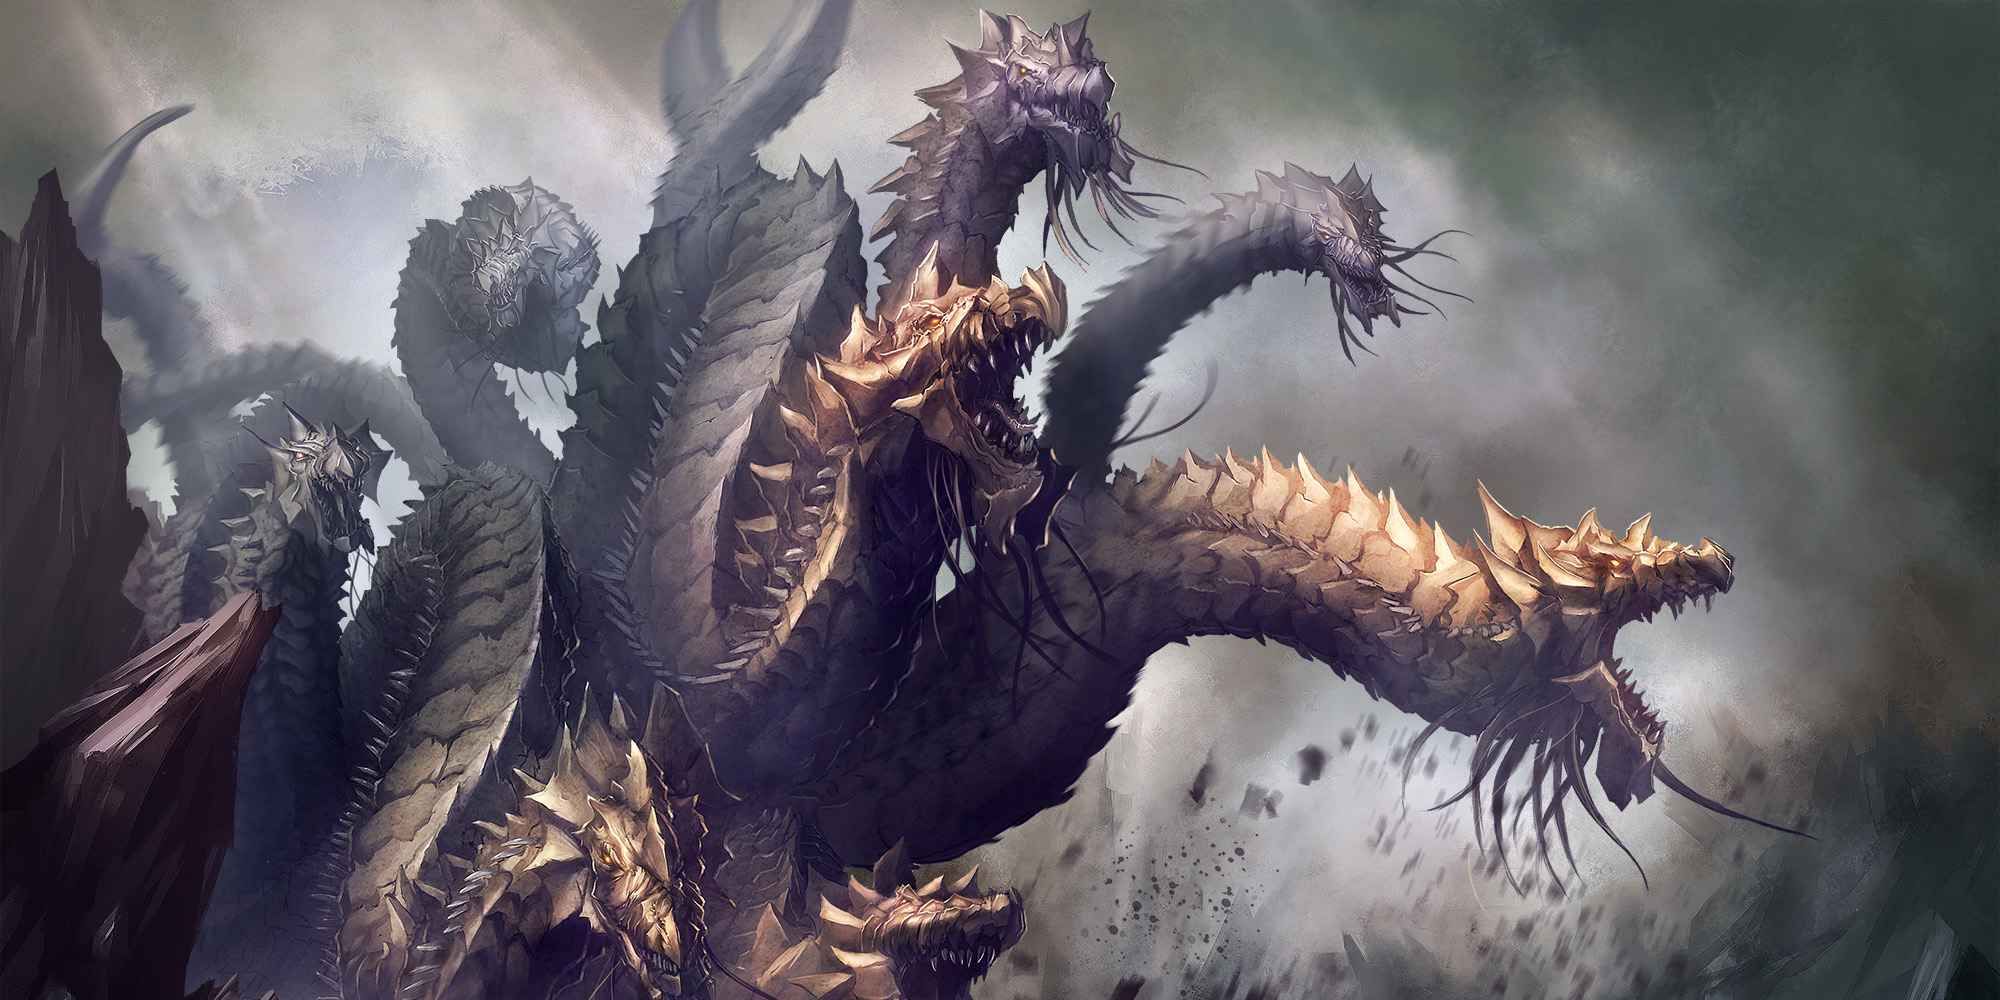 A hydra in Dungeons & Dragons with many dragon-like heads